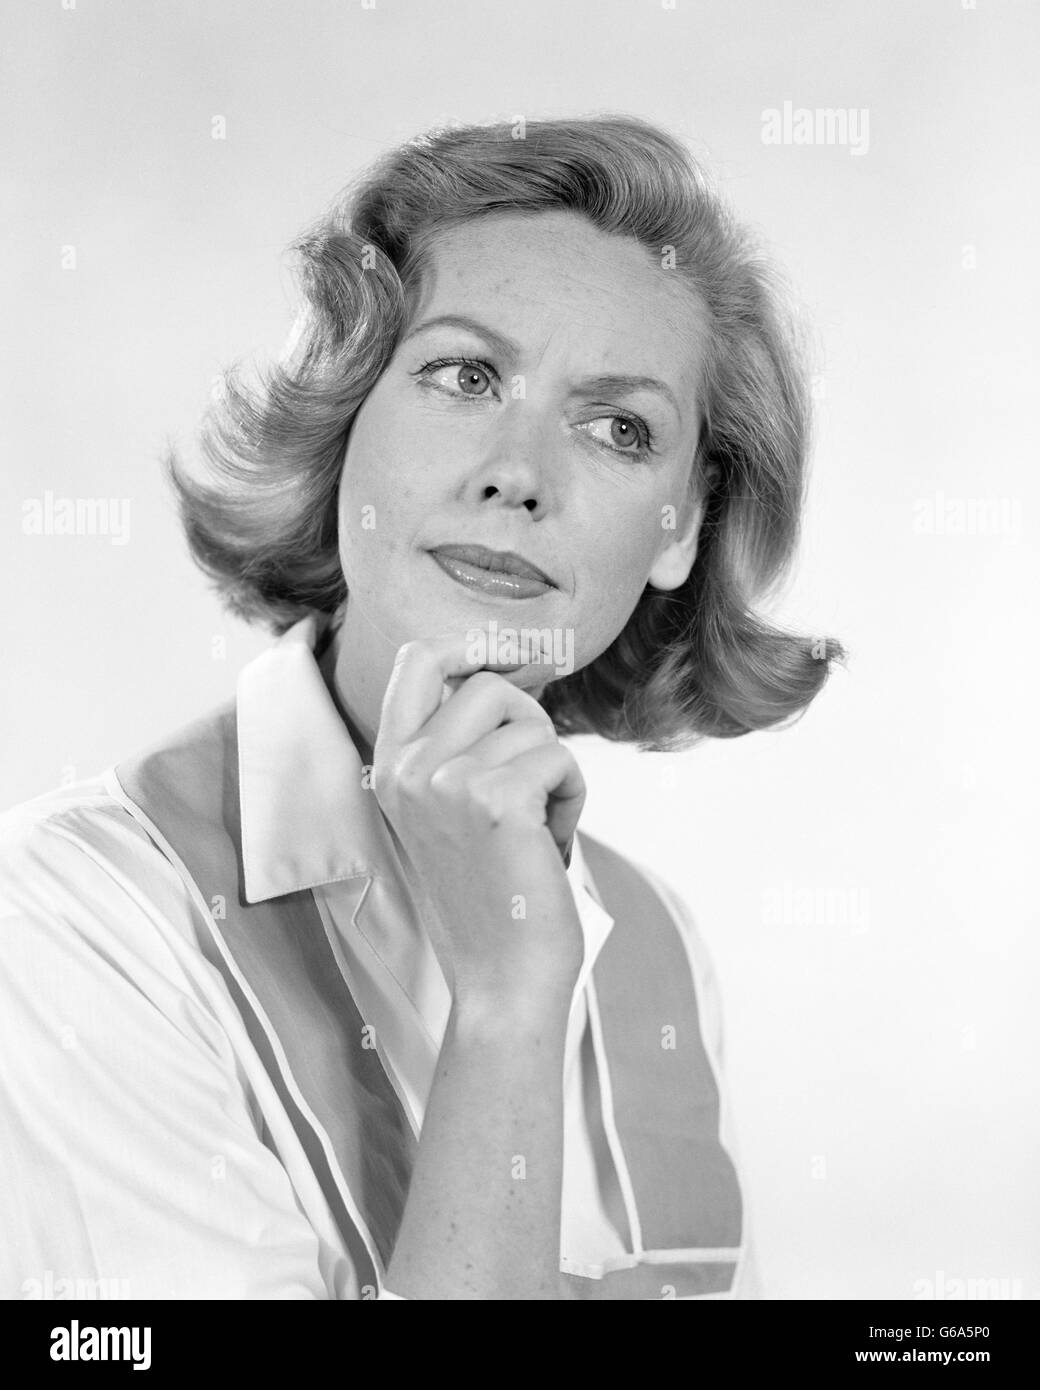 1950s 1960s WOMAN HOUSEWIFE PORTRAIT THINKING THOUGHTFUL FACIAL EXPRESSION HAND TOUCHING CHIN Stock Photo